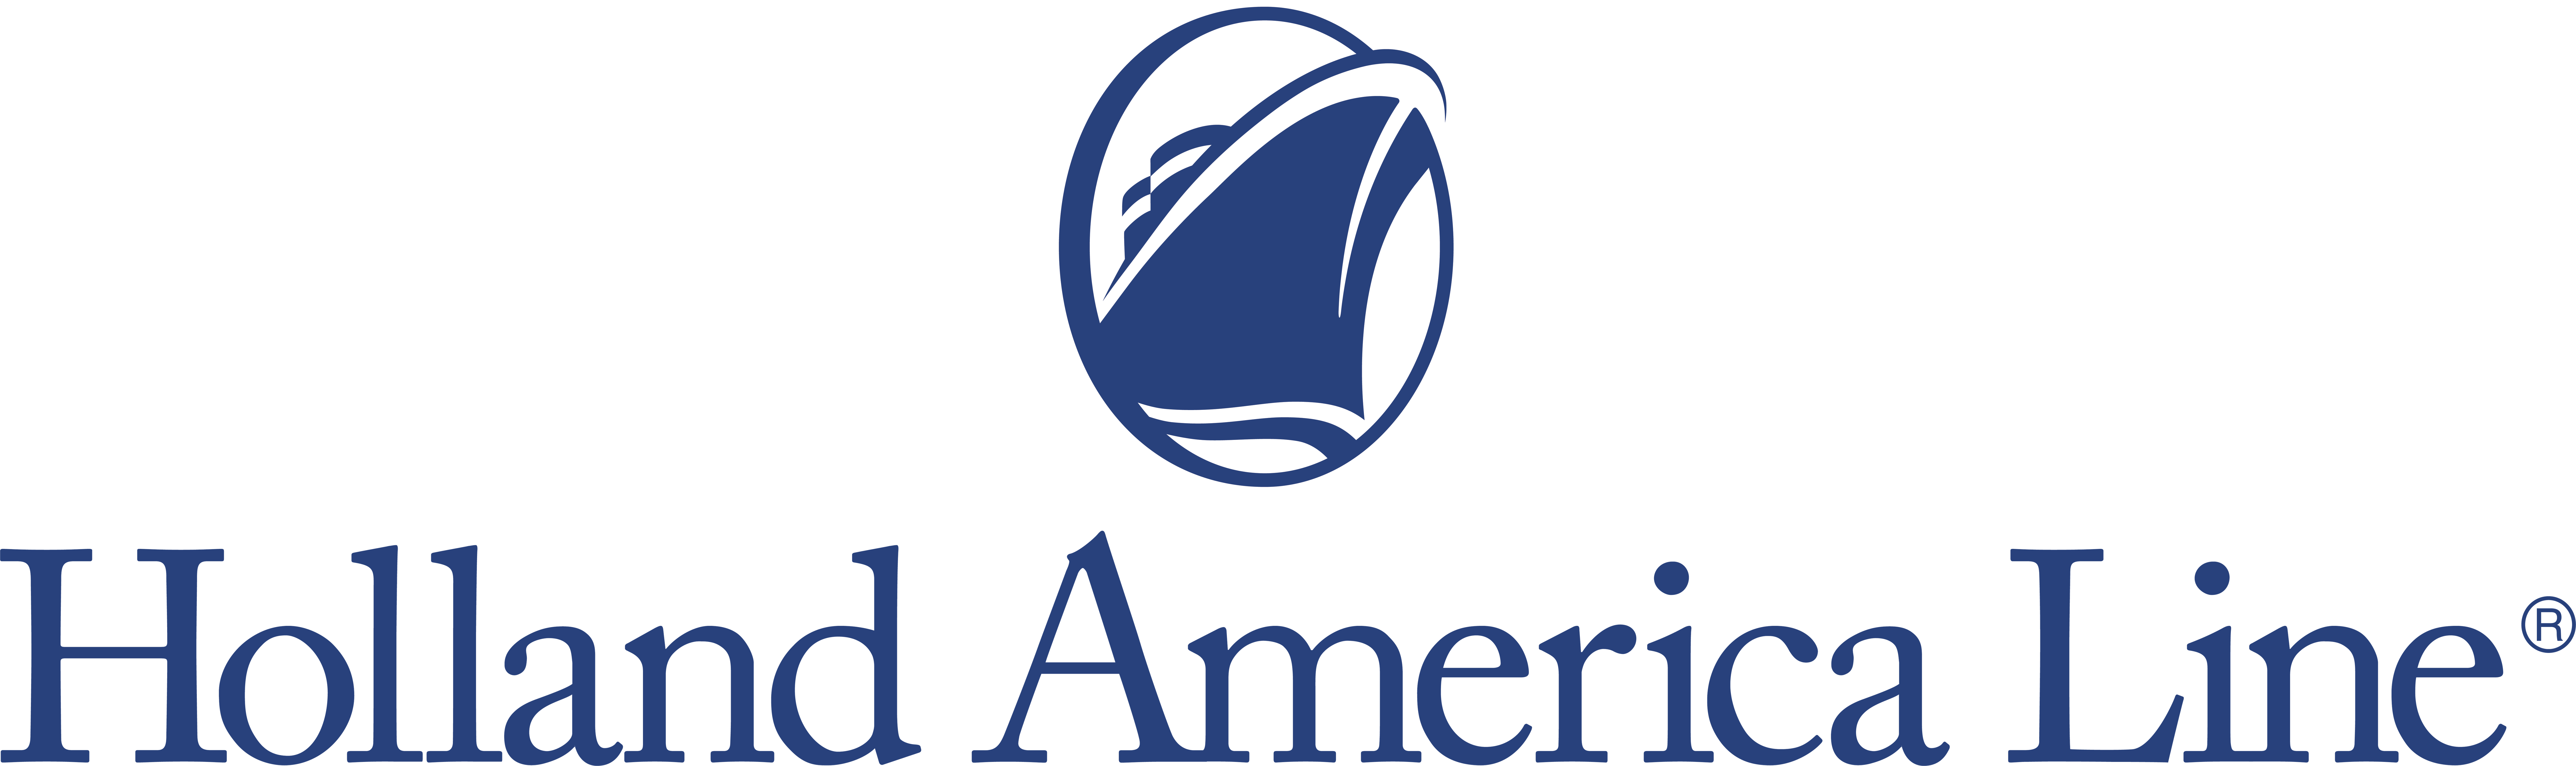 American Retail Store Logo - Home - Carnival Corporation